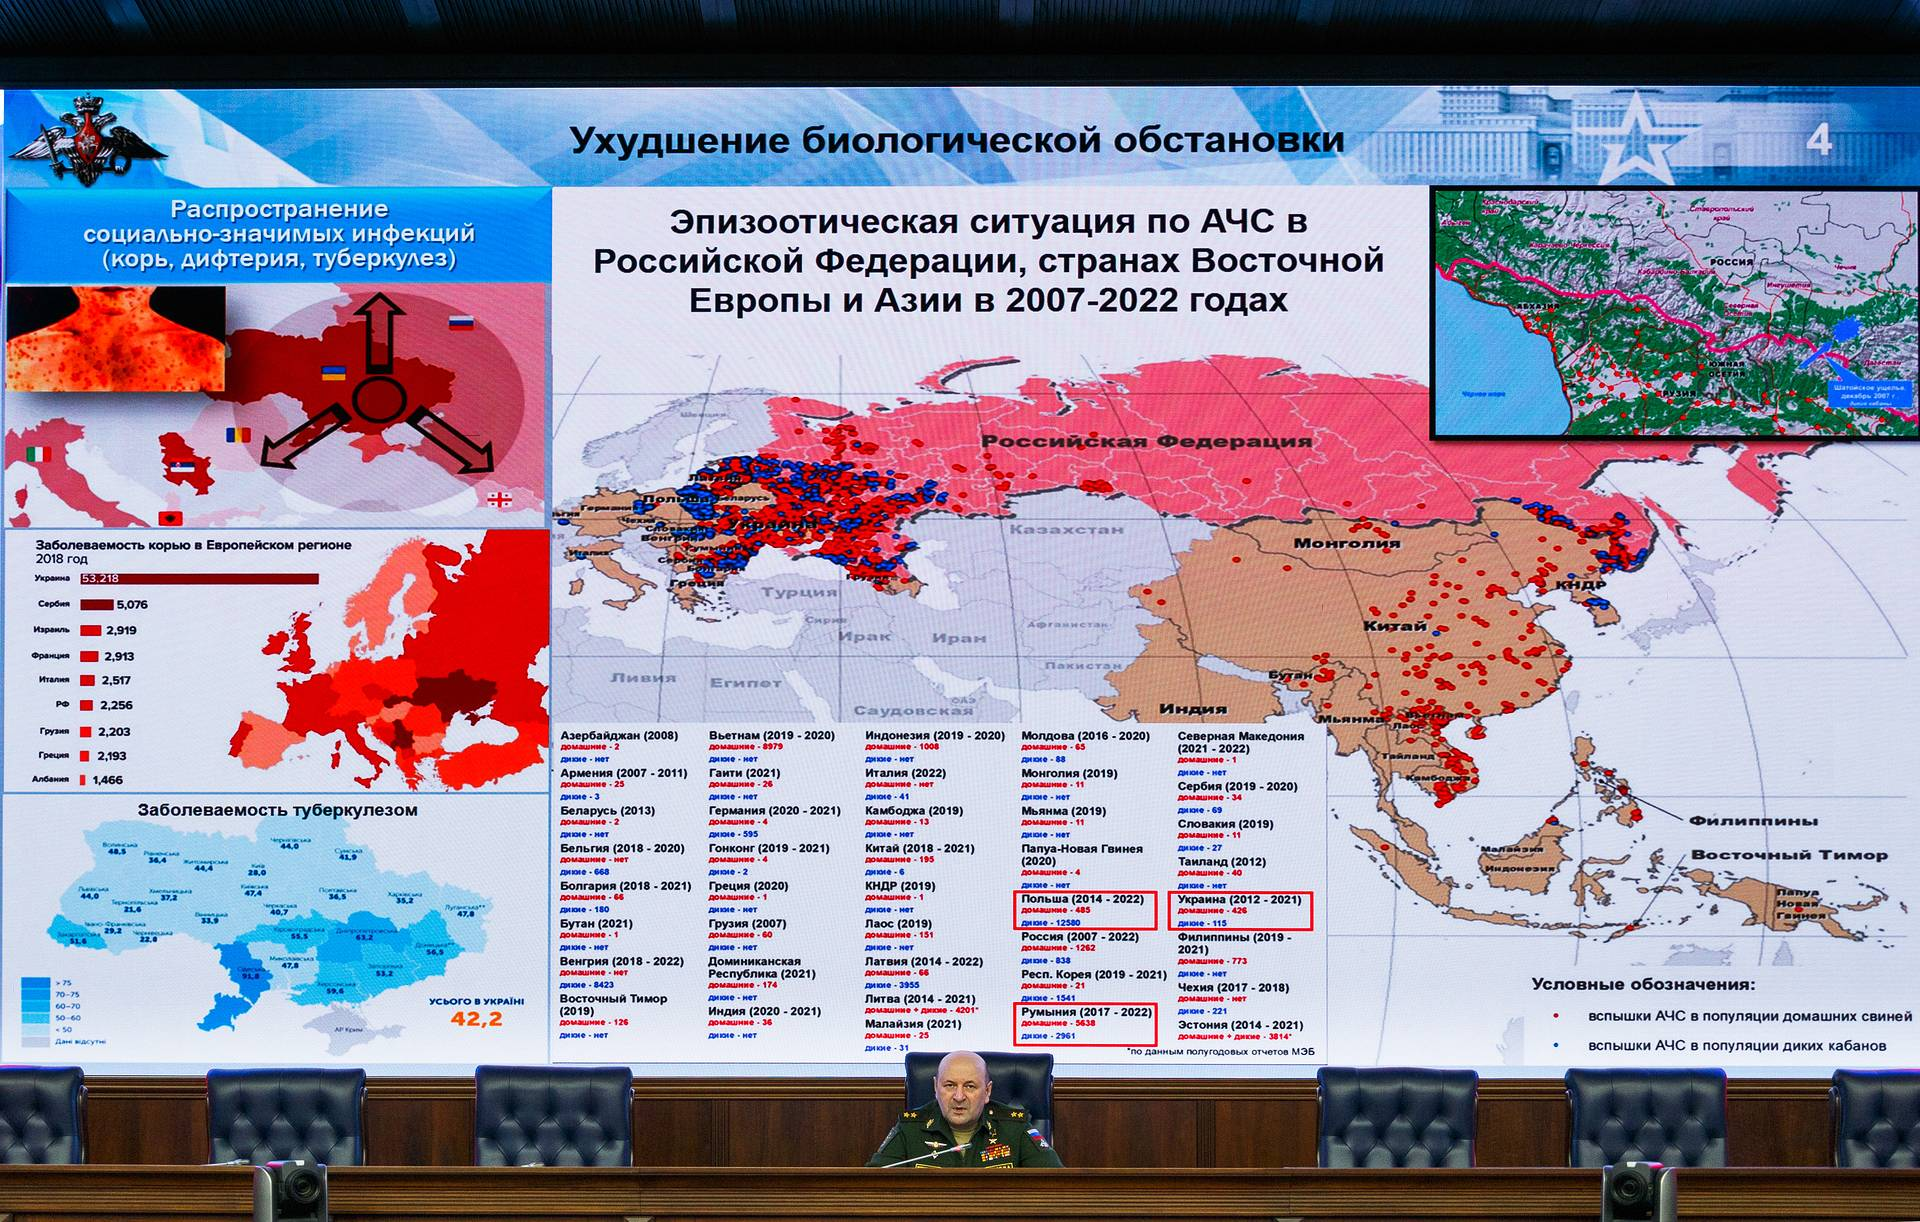 Russian War Report: Kremlin recycles old narratives to claim Ukraine is constructing dirty bombs and bioweapons